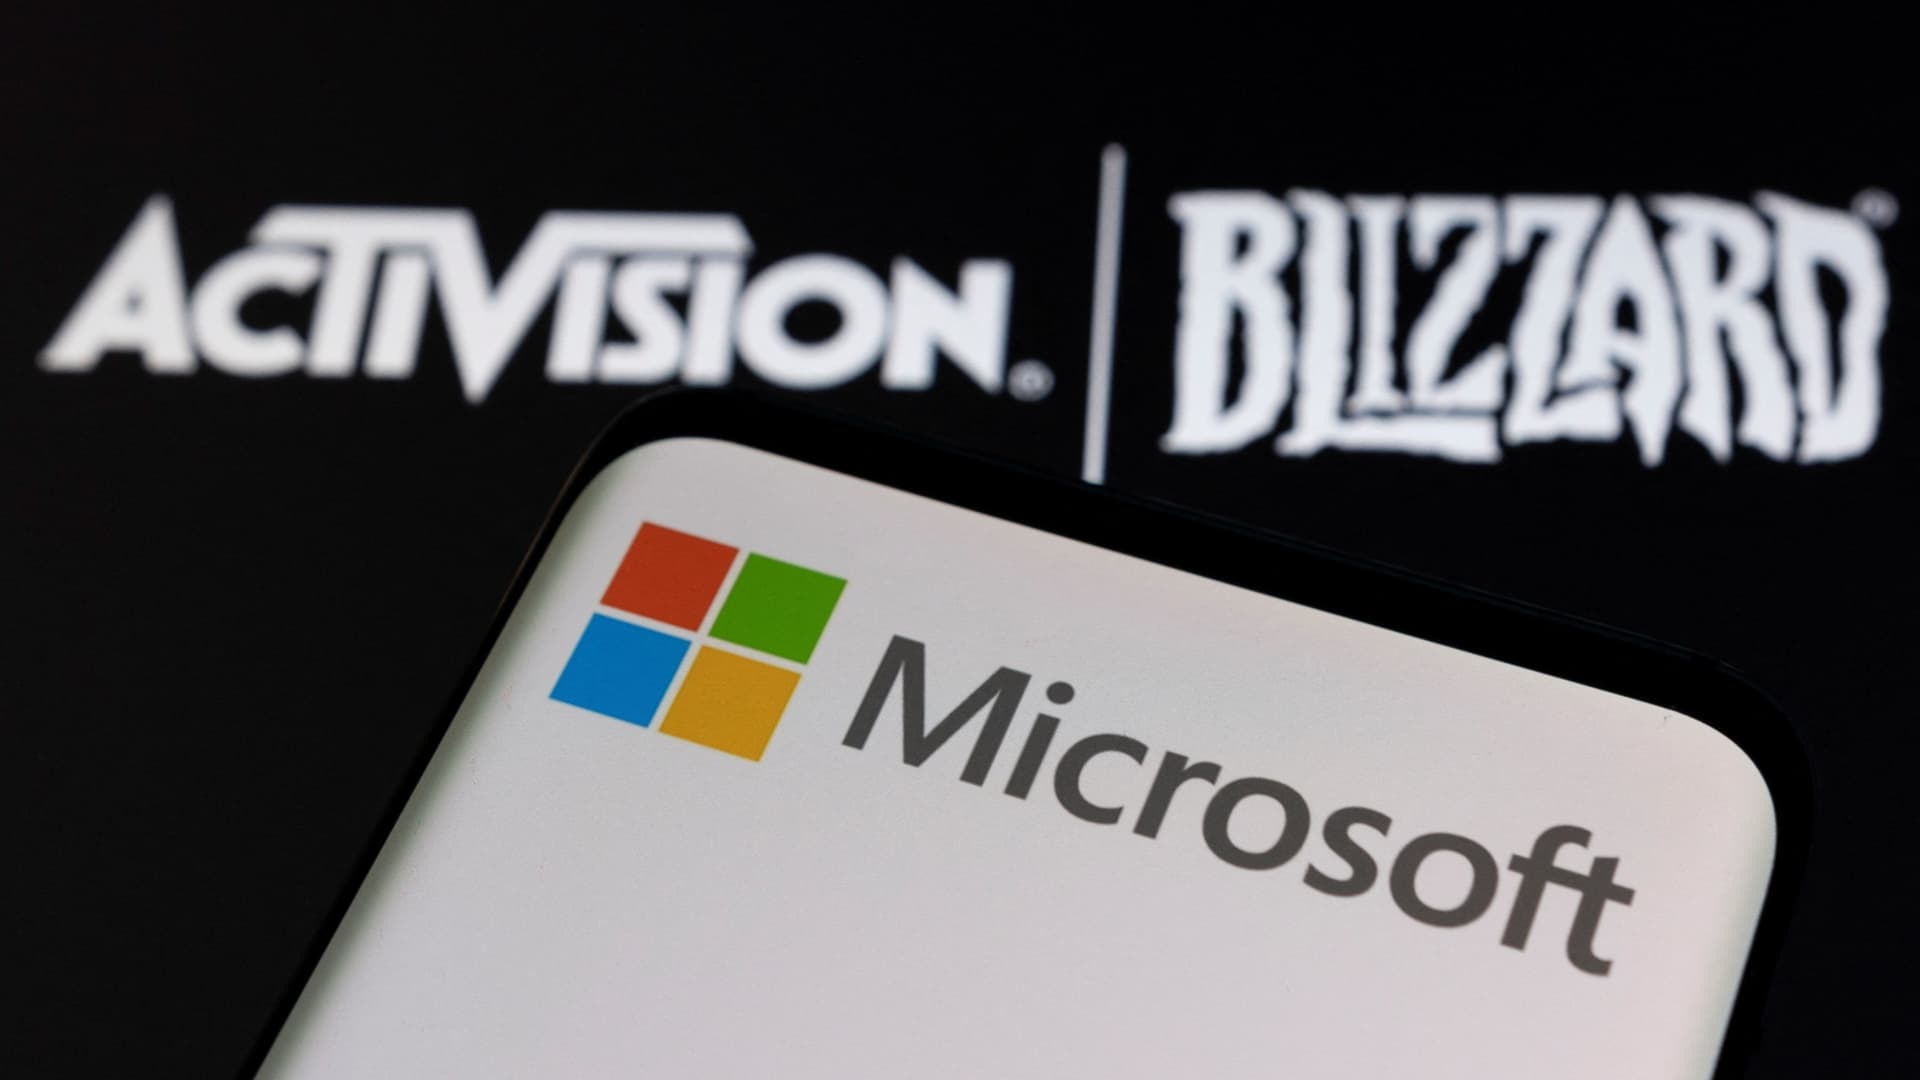 Stocks making the biggest moves midday: Apple, Manchester United, Activision Blizzard and more